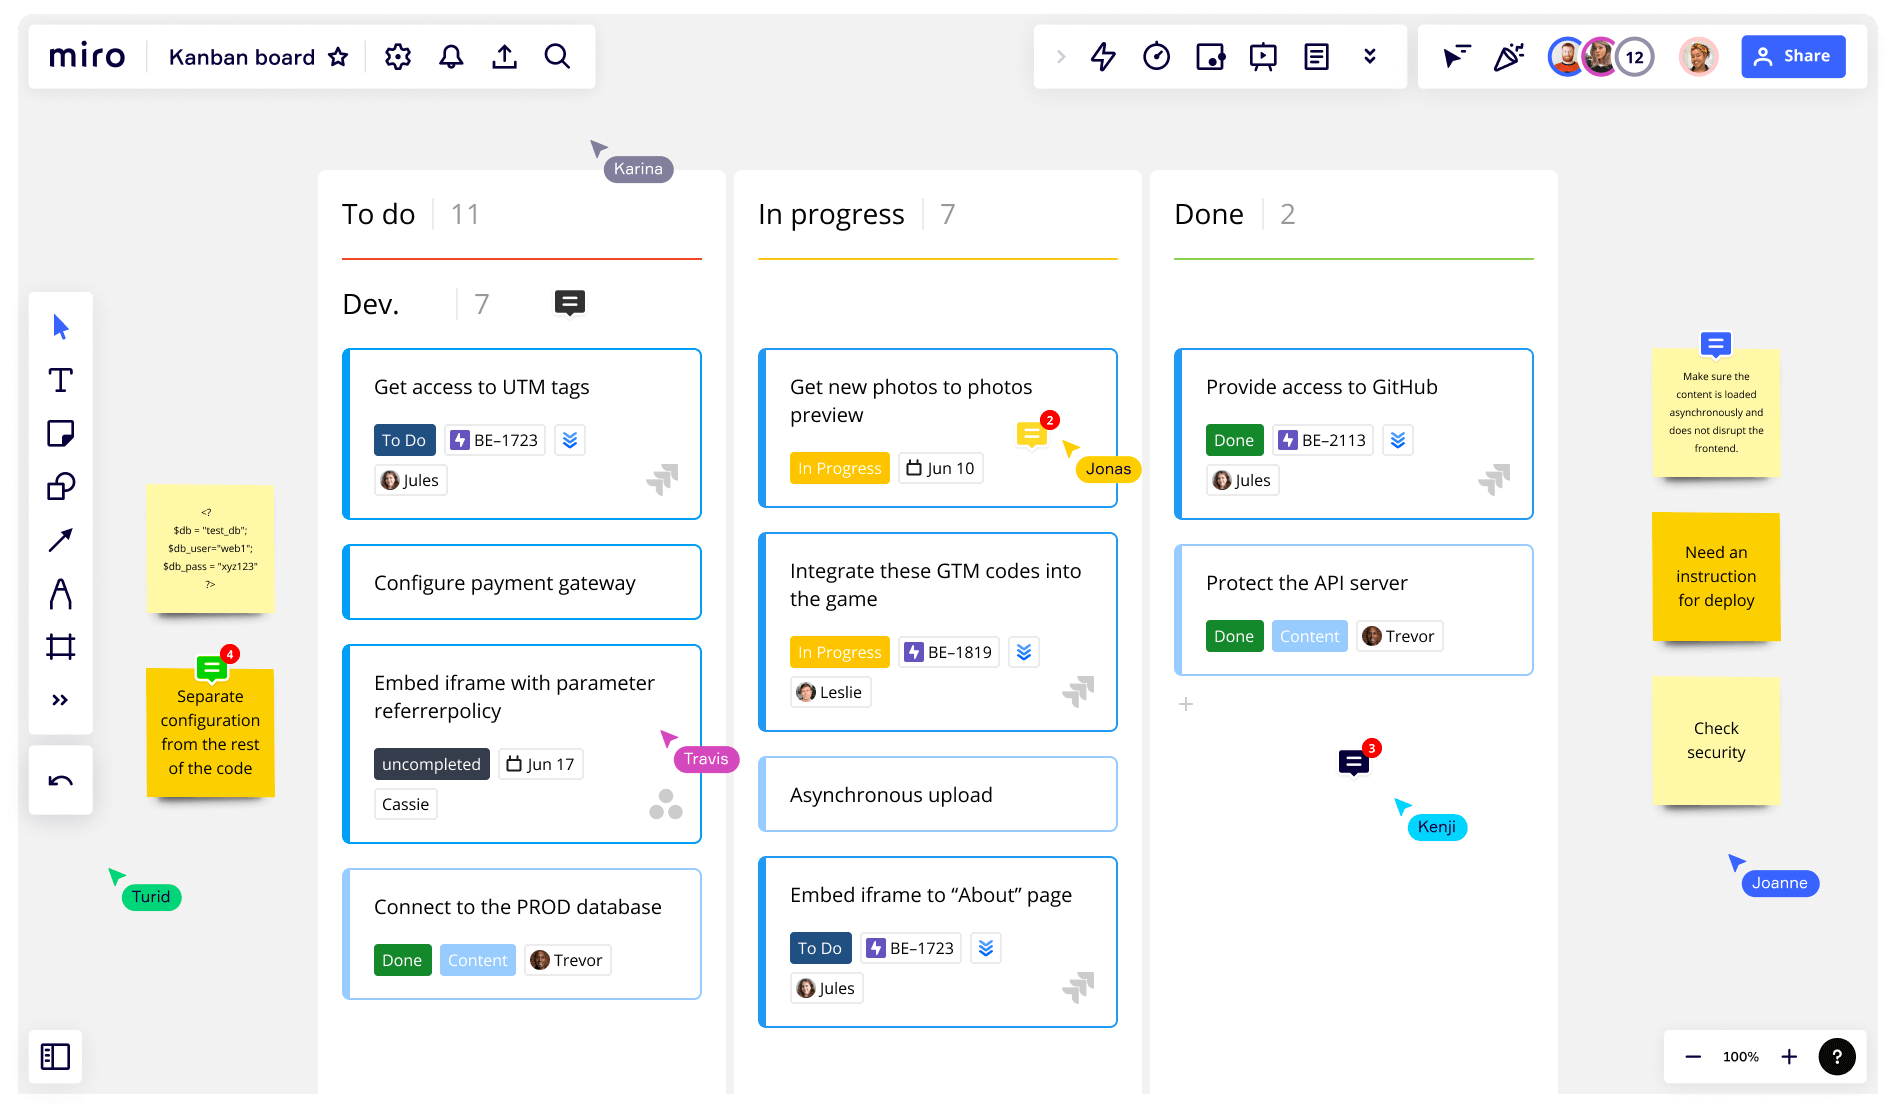 Kanban – A Guide to Organizing Projects & Work